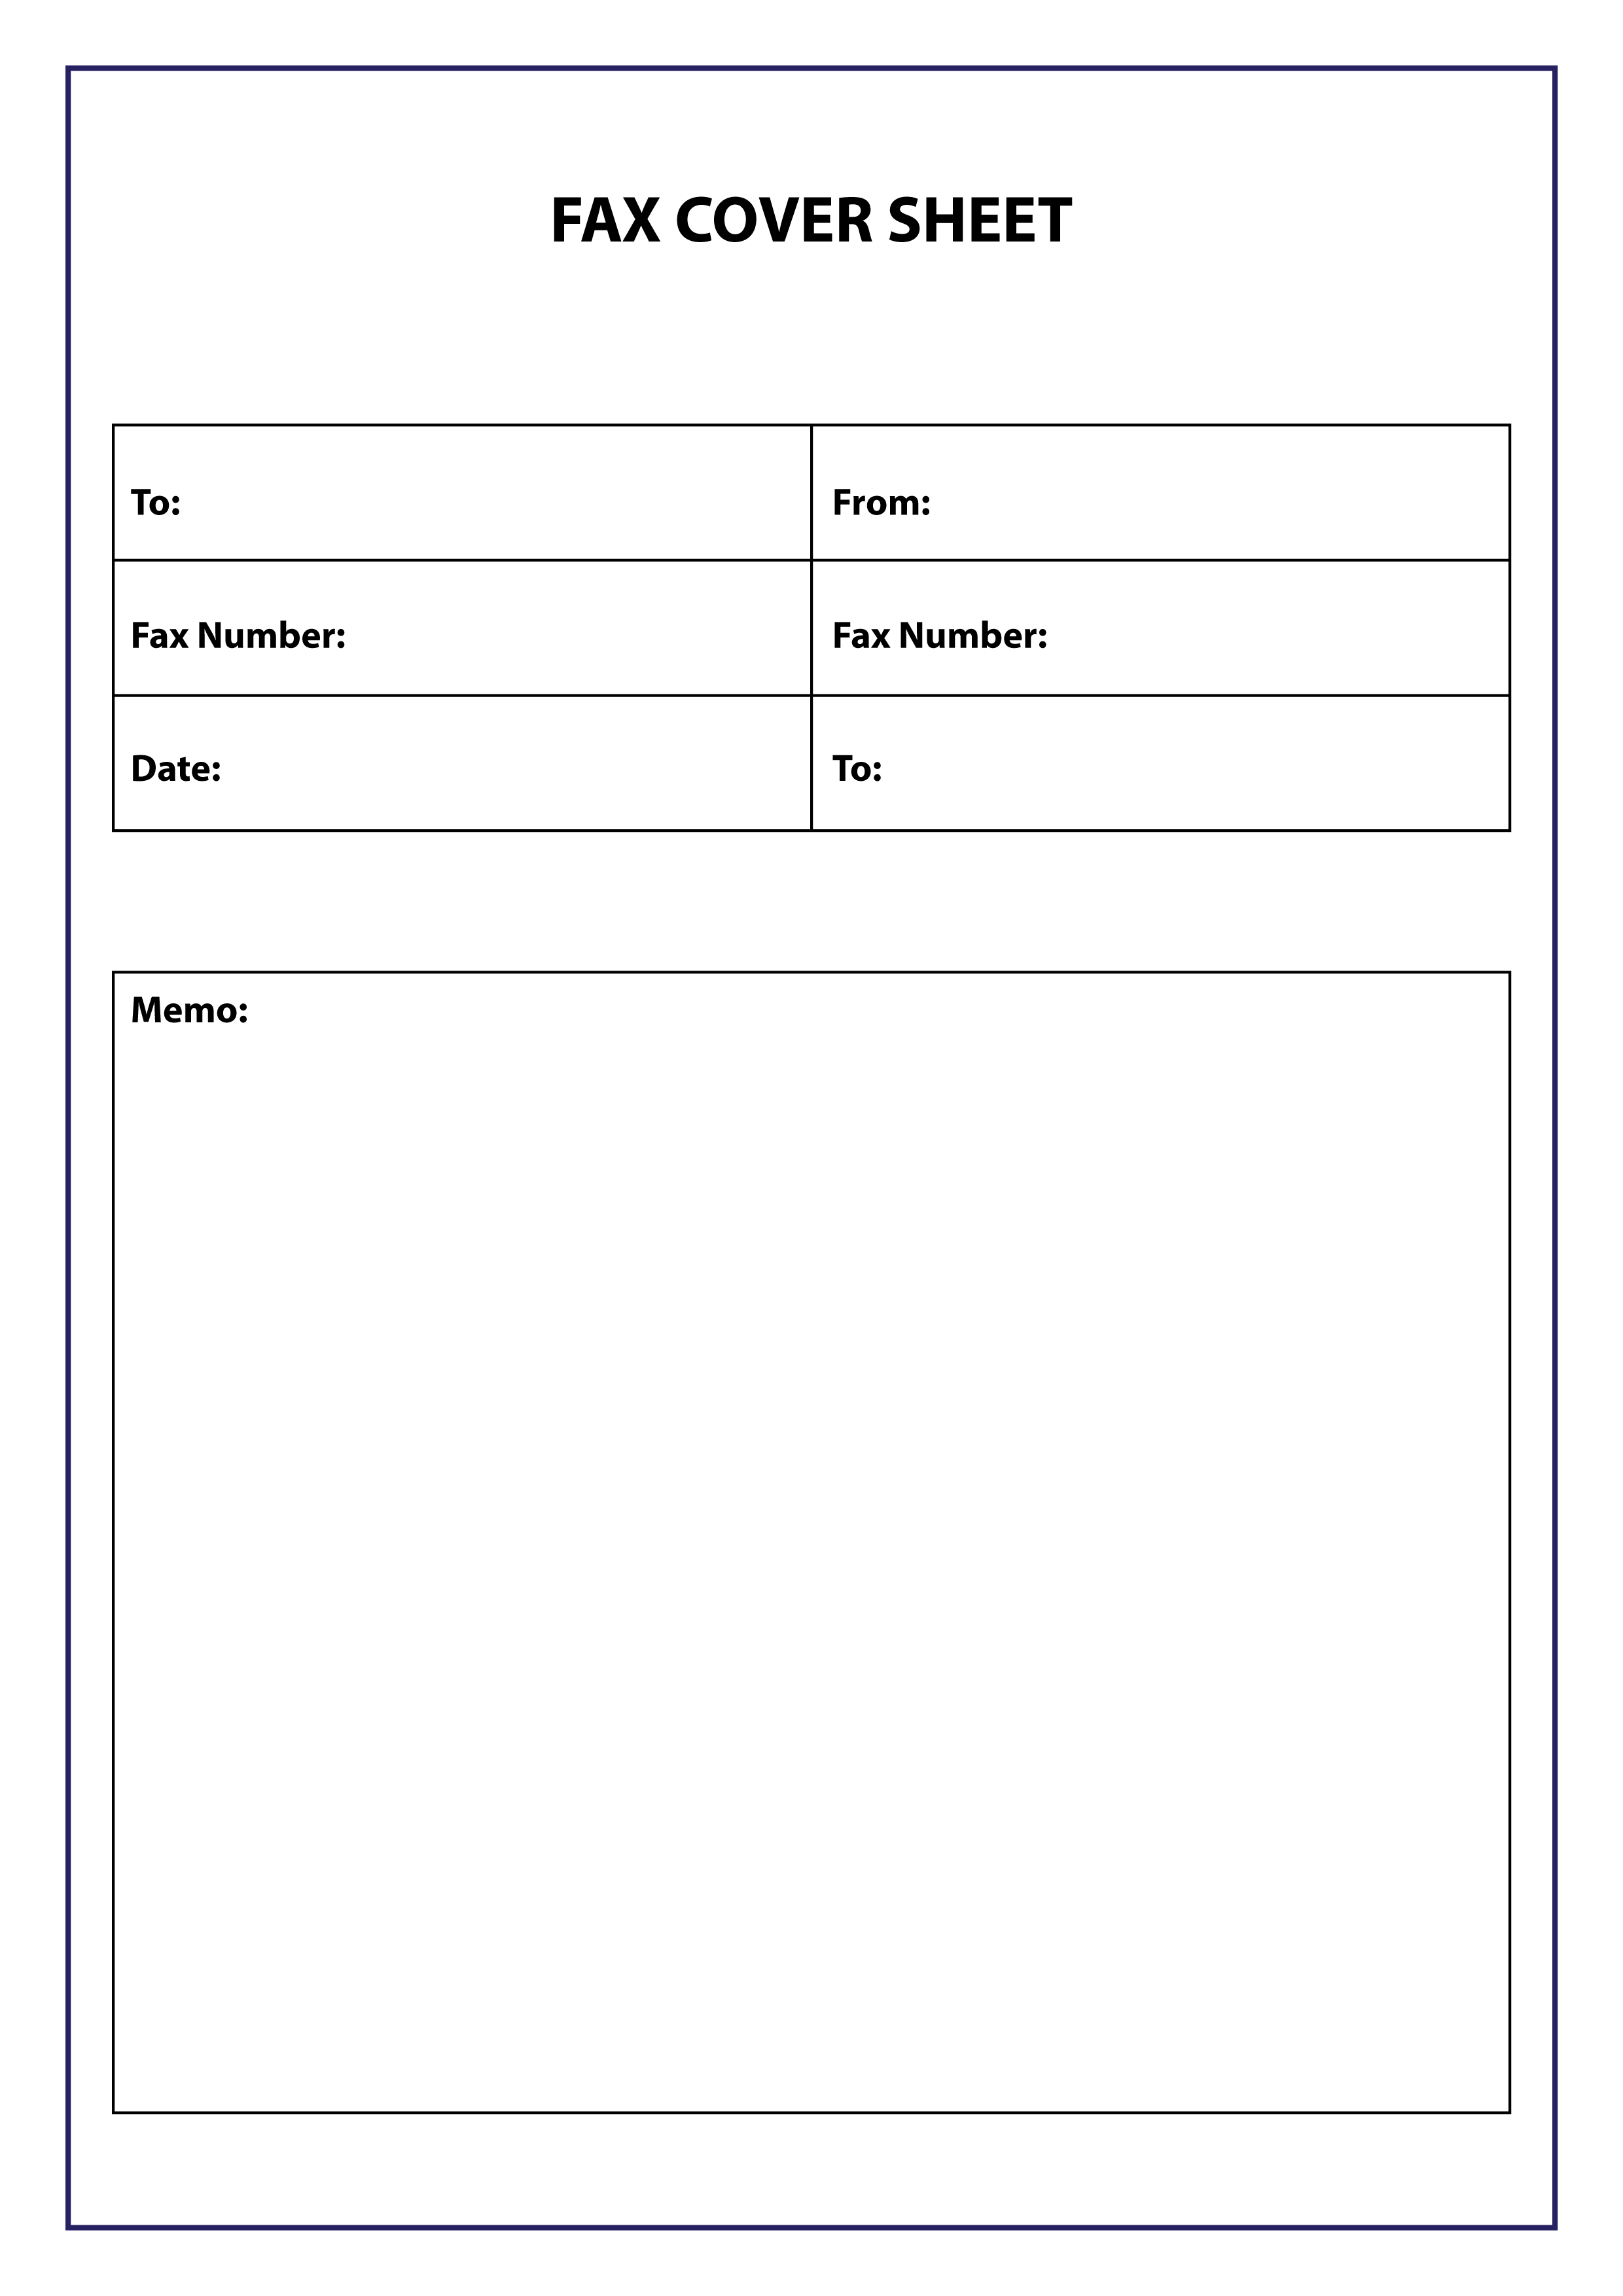 free-fax-cover-sheet-template-word